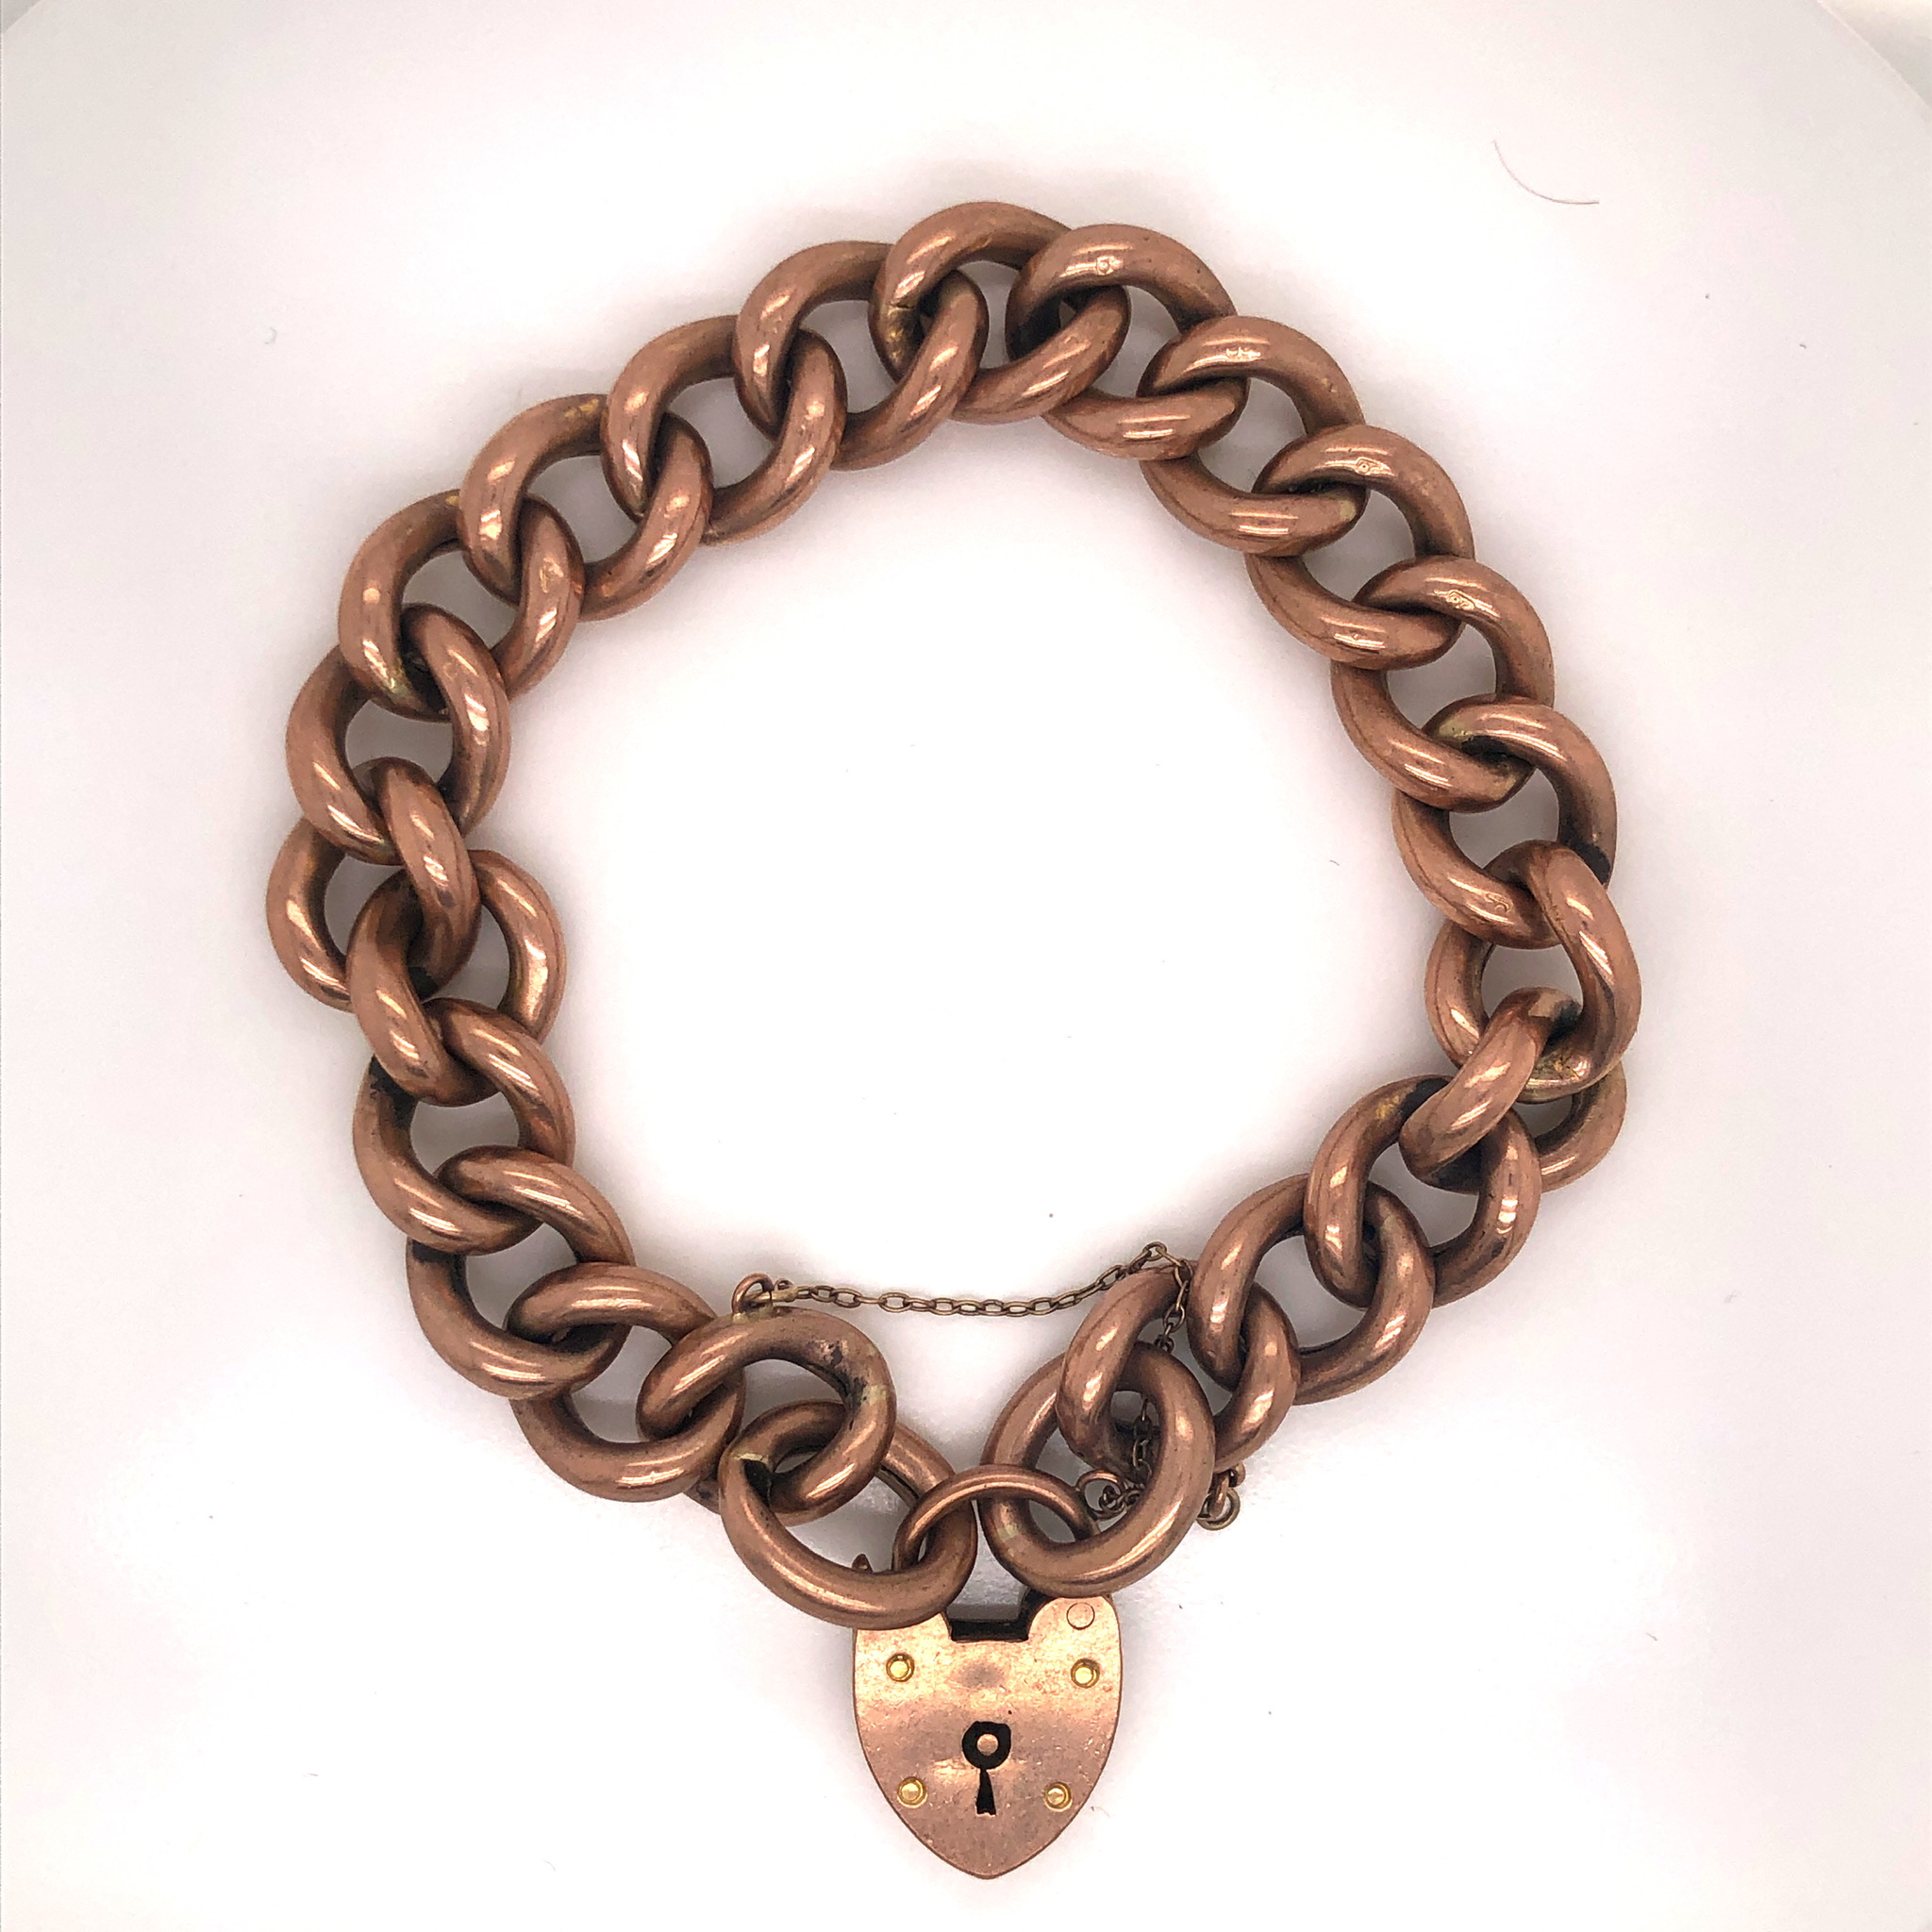 A 9ct OLD ROSE GOLD CURB LINK CHARM BRACELET EACH LINKED STAMPED 9ct, COMPLETE WITH PADLOCK AND - Image 2 of 2